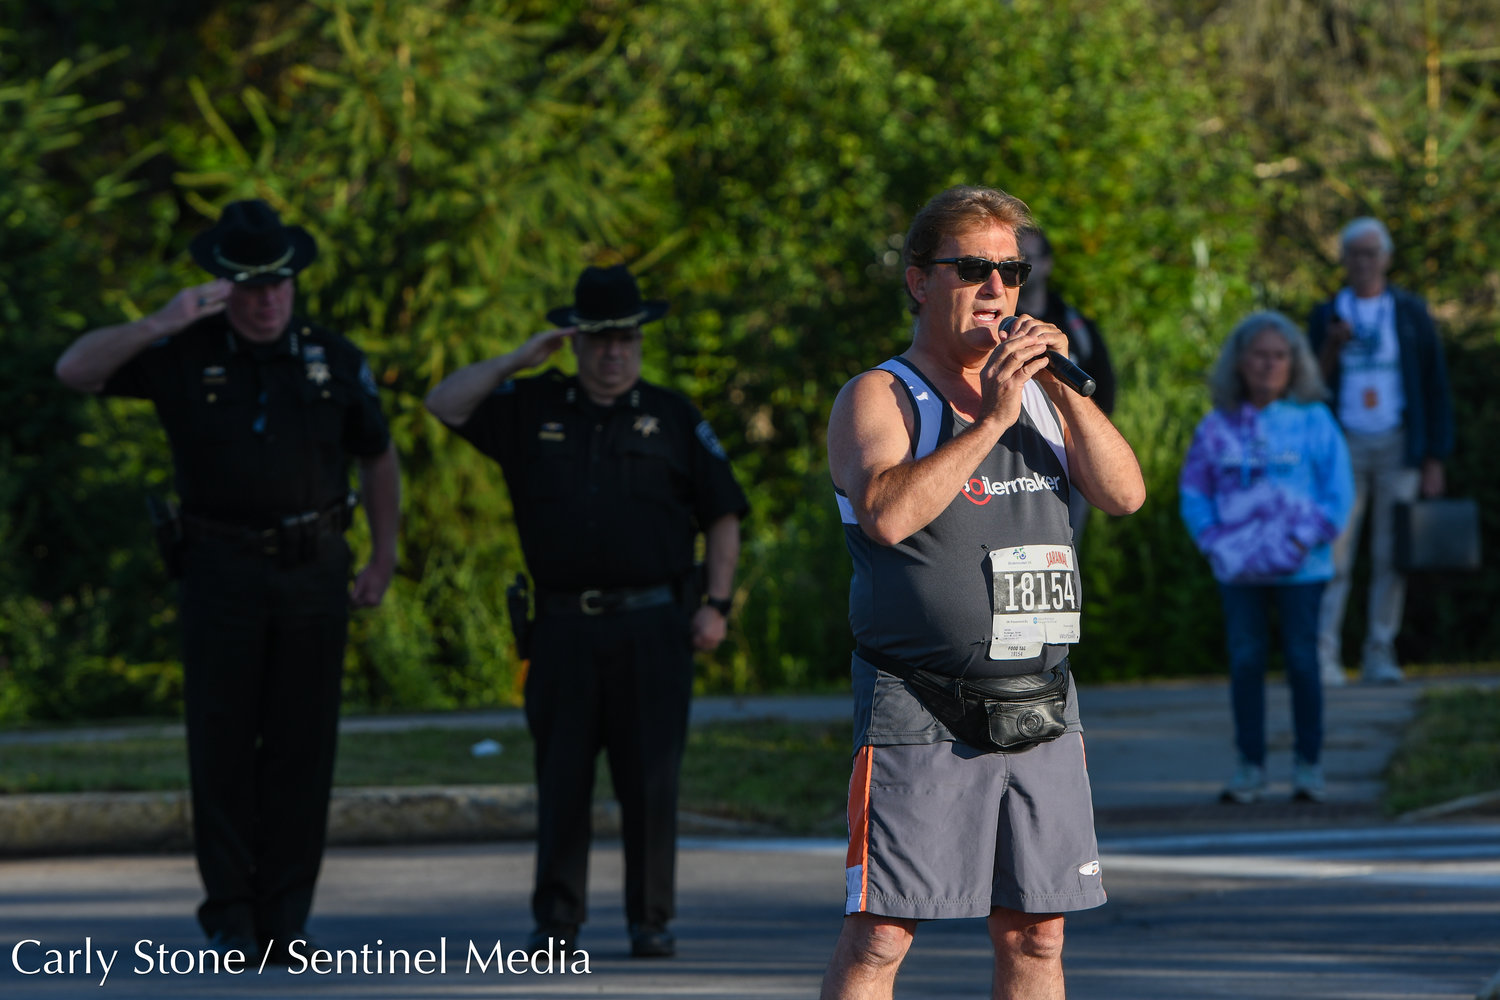 The 2022 Boilermaker 5K took place on Sunday, July 10 in Utica.